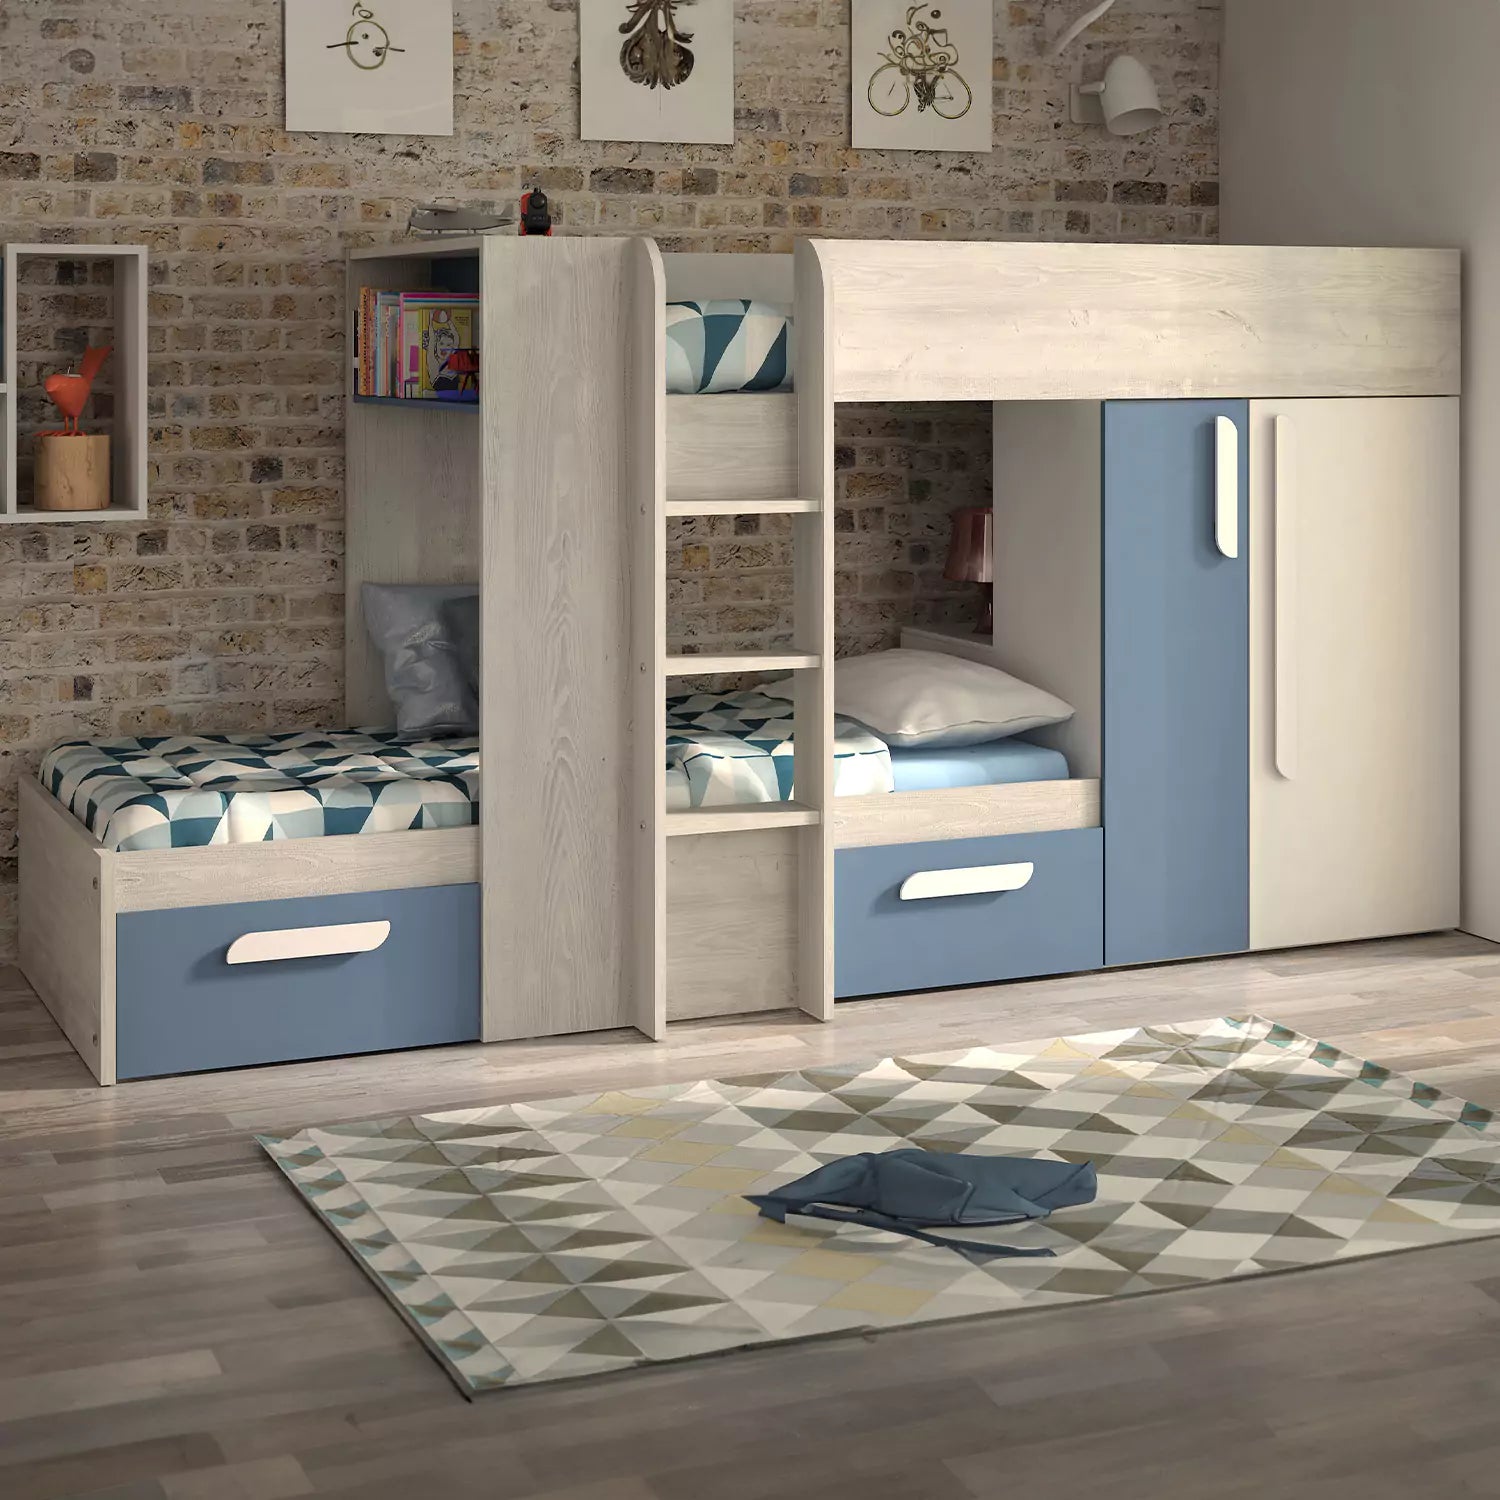 An image of Trasman Barca Bunk Bed with Drawers & Wardrobe - Blue